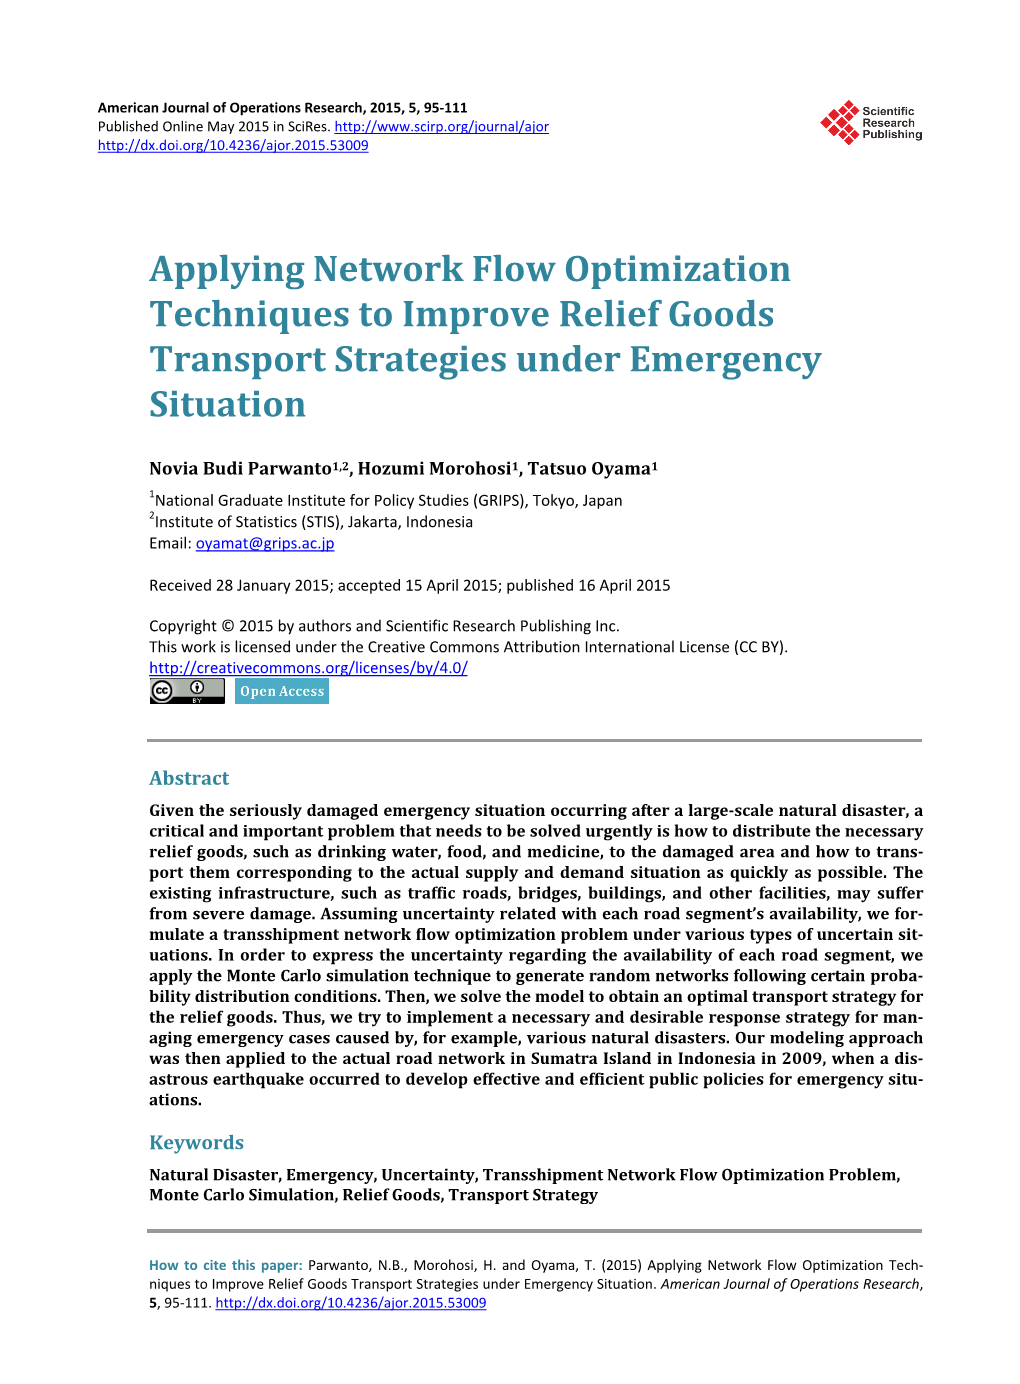 Applying Network Flow Optimization Techniques to Improve Relief Goods Transport Strategies Under Emergency Situation